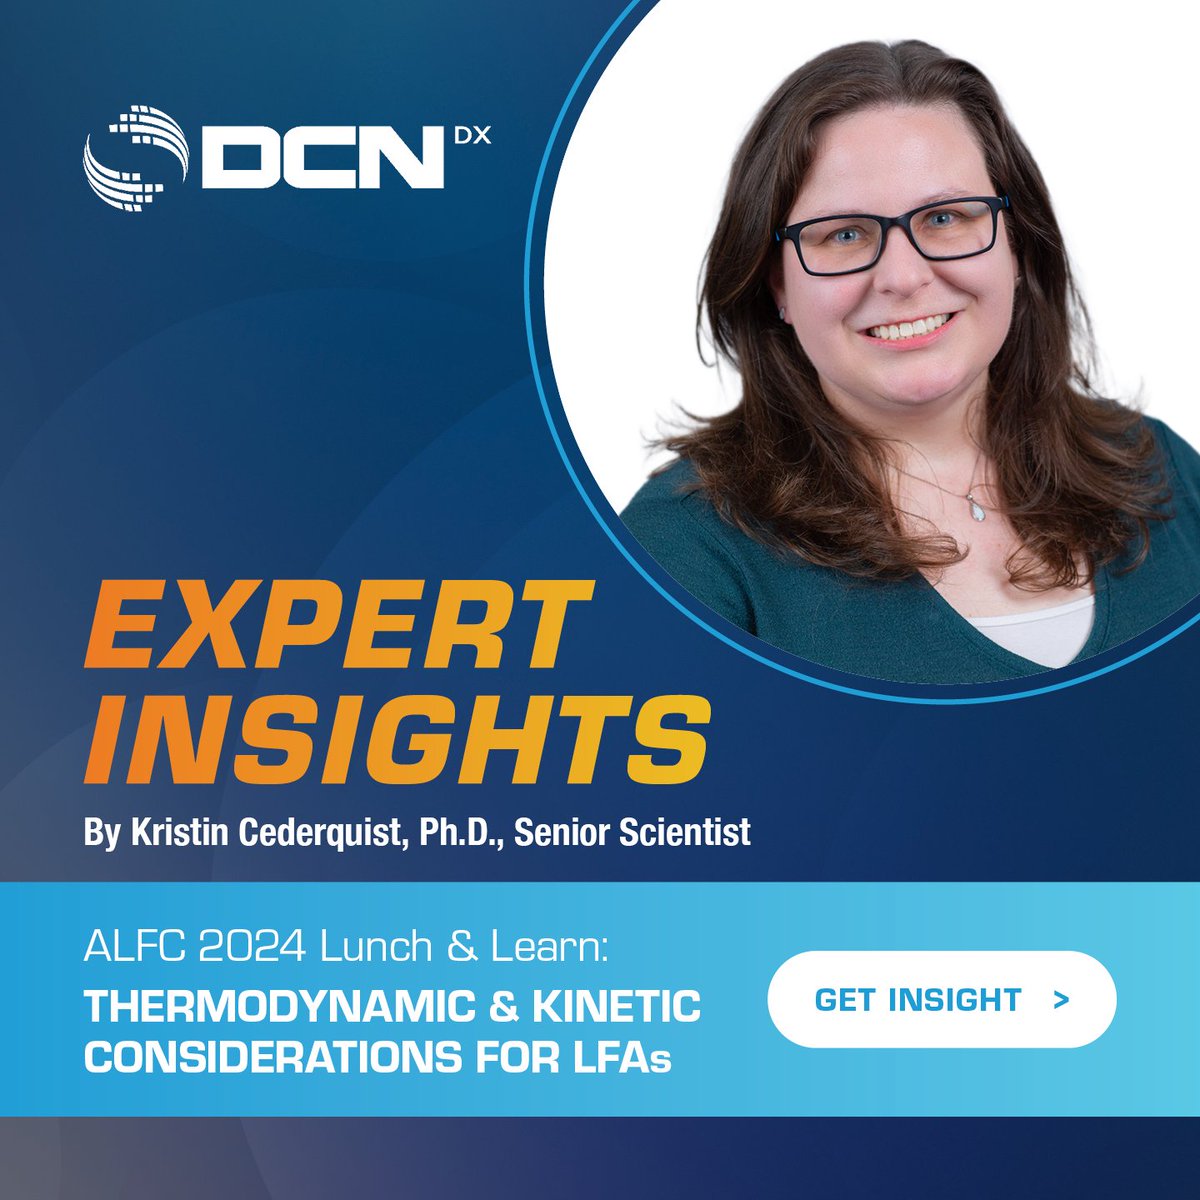 We're excited to share a recorded session from #ALFC2024 featuring our very own Dr. Kristin Cederquist. Dr. Cederquist delves into the critical roles of #thermodynamics and #kinetics in the design and performance of #LFAs. Watch here: hubs.ly/Q02sWCWj0